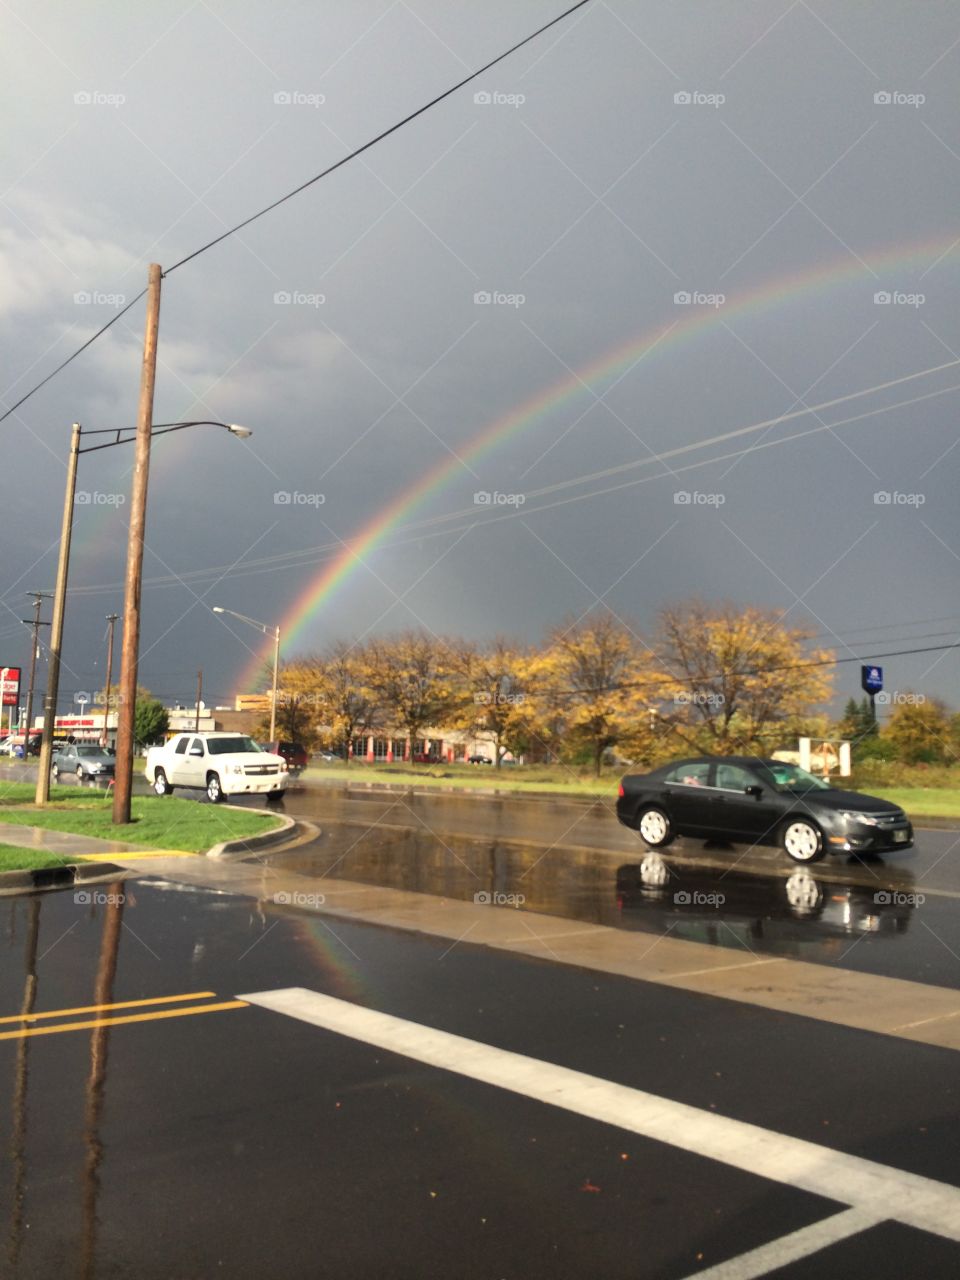 Traffic after a storm with a rainbow
